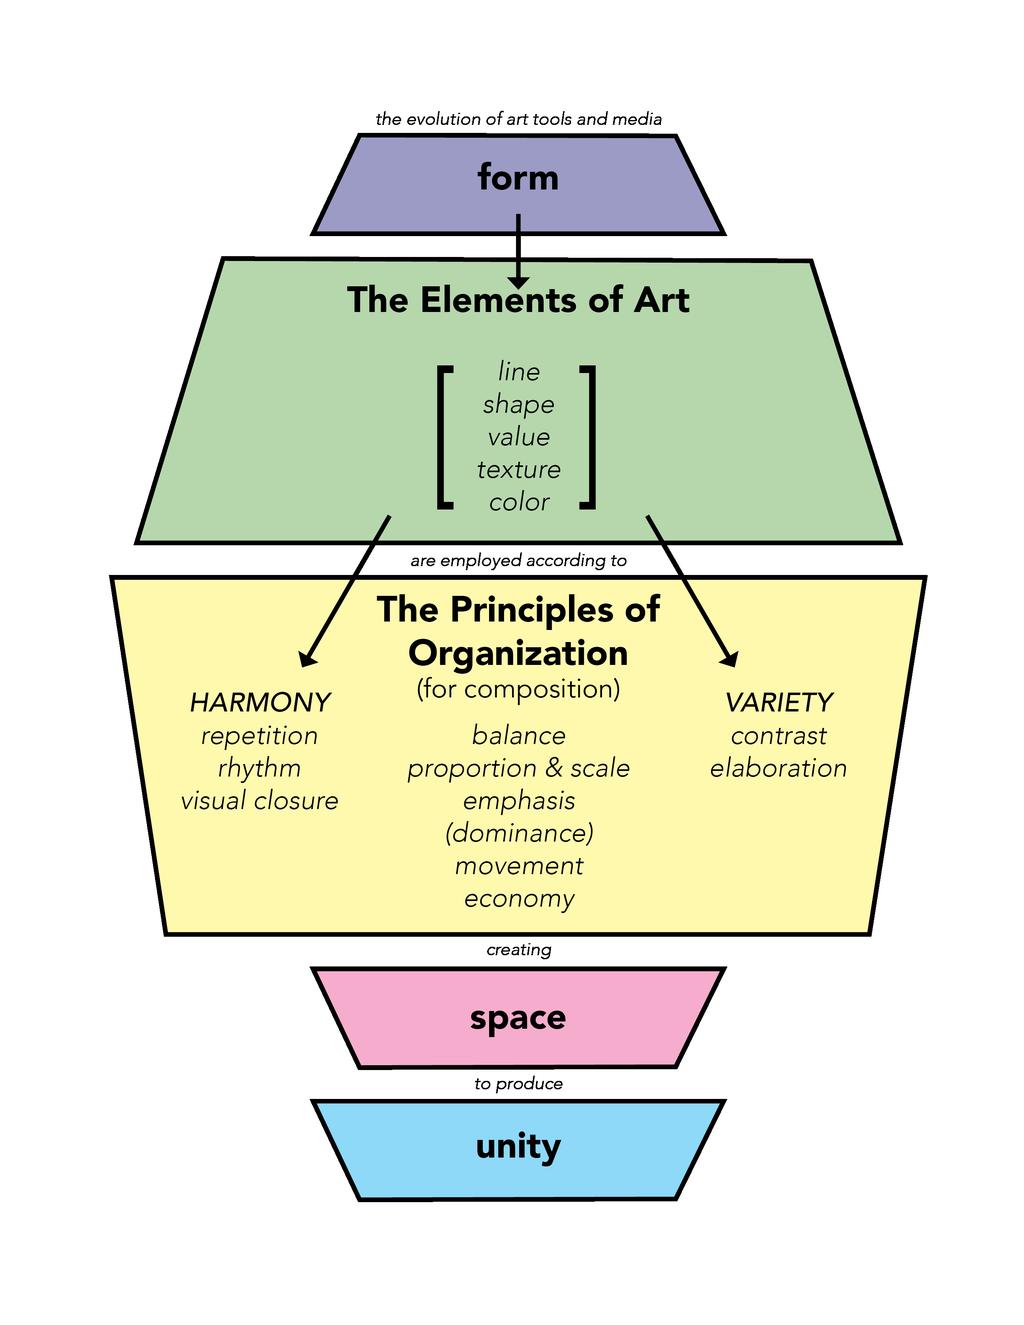 The Elements and Principles of Art and Design Form the organization or inventive arrangement of all visual elements according to the principles that will develop unity in artwork; the total